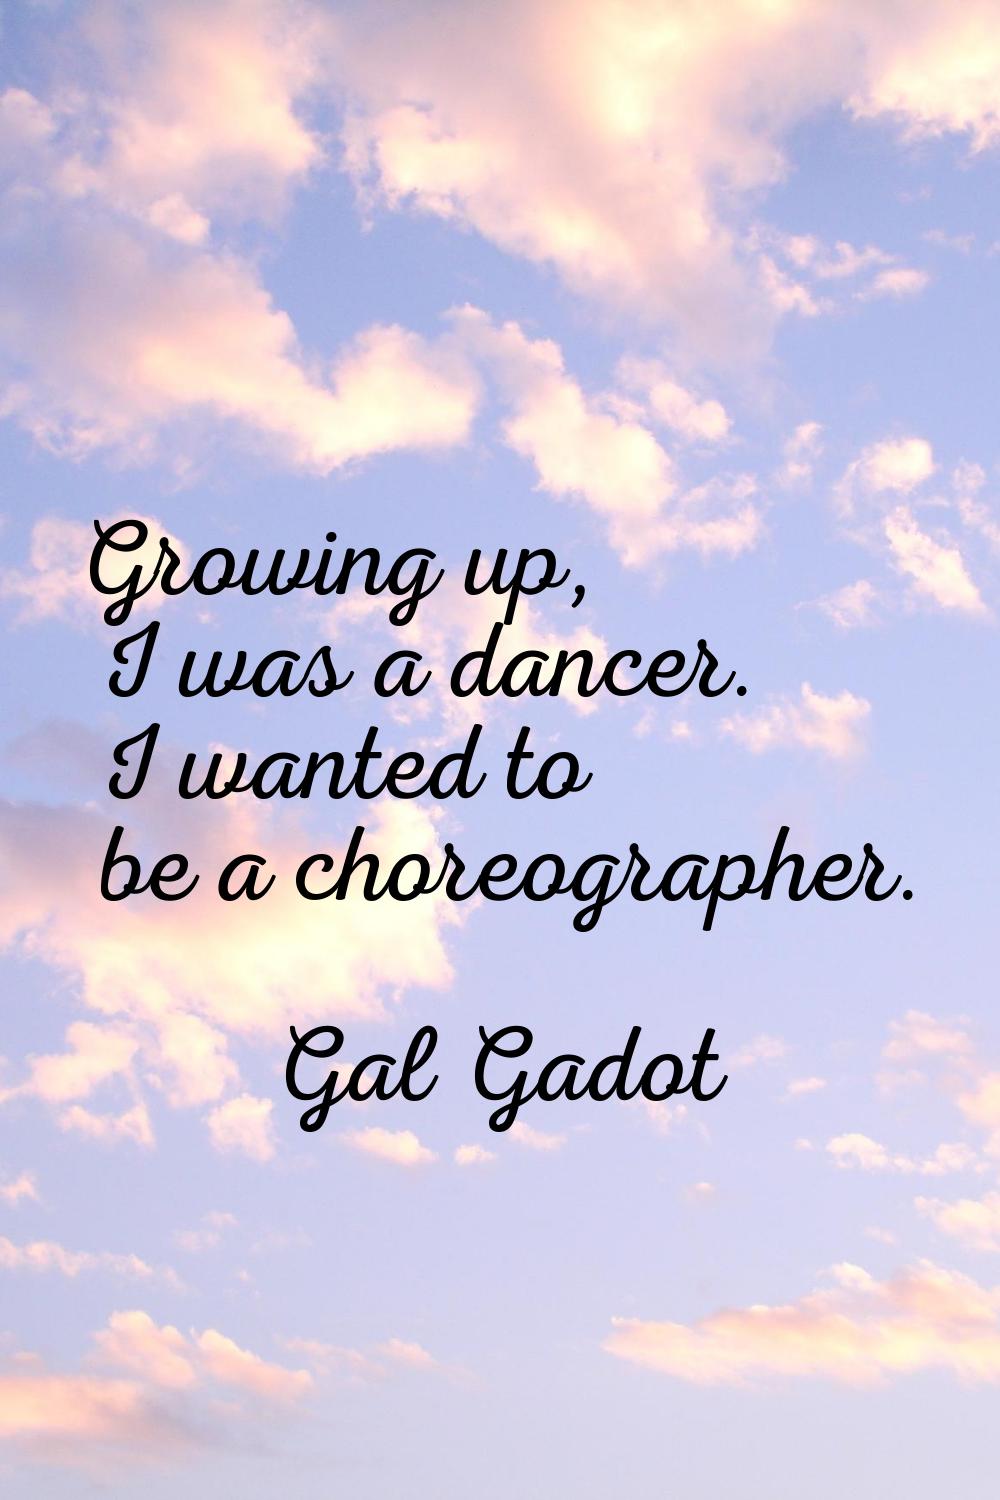 Growing up, I was a dancer. I wanted to be a choreographer.